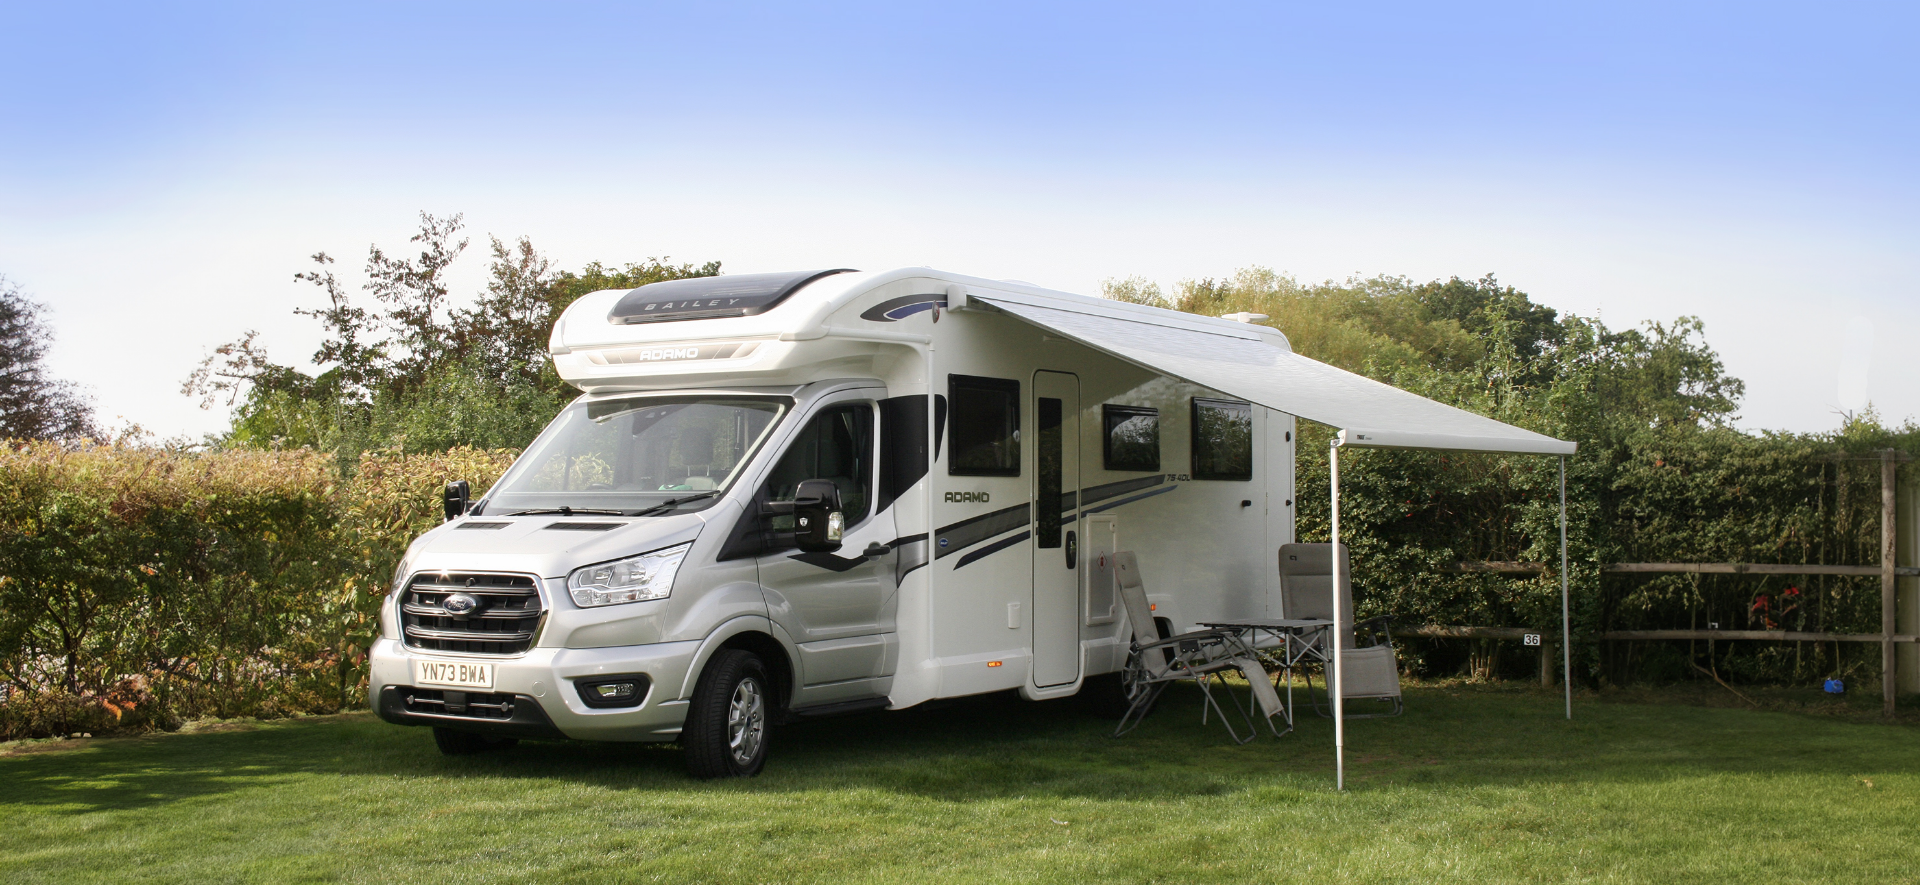 Holiday with Style - Luxury Motorhome